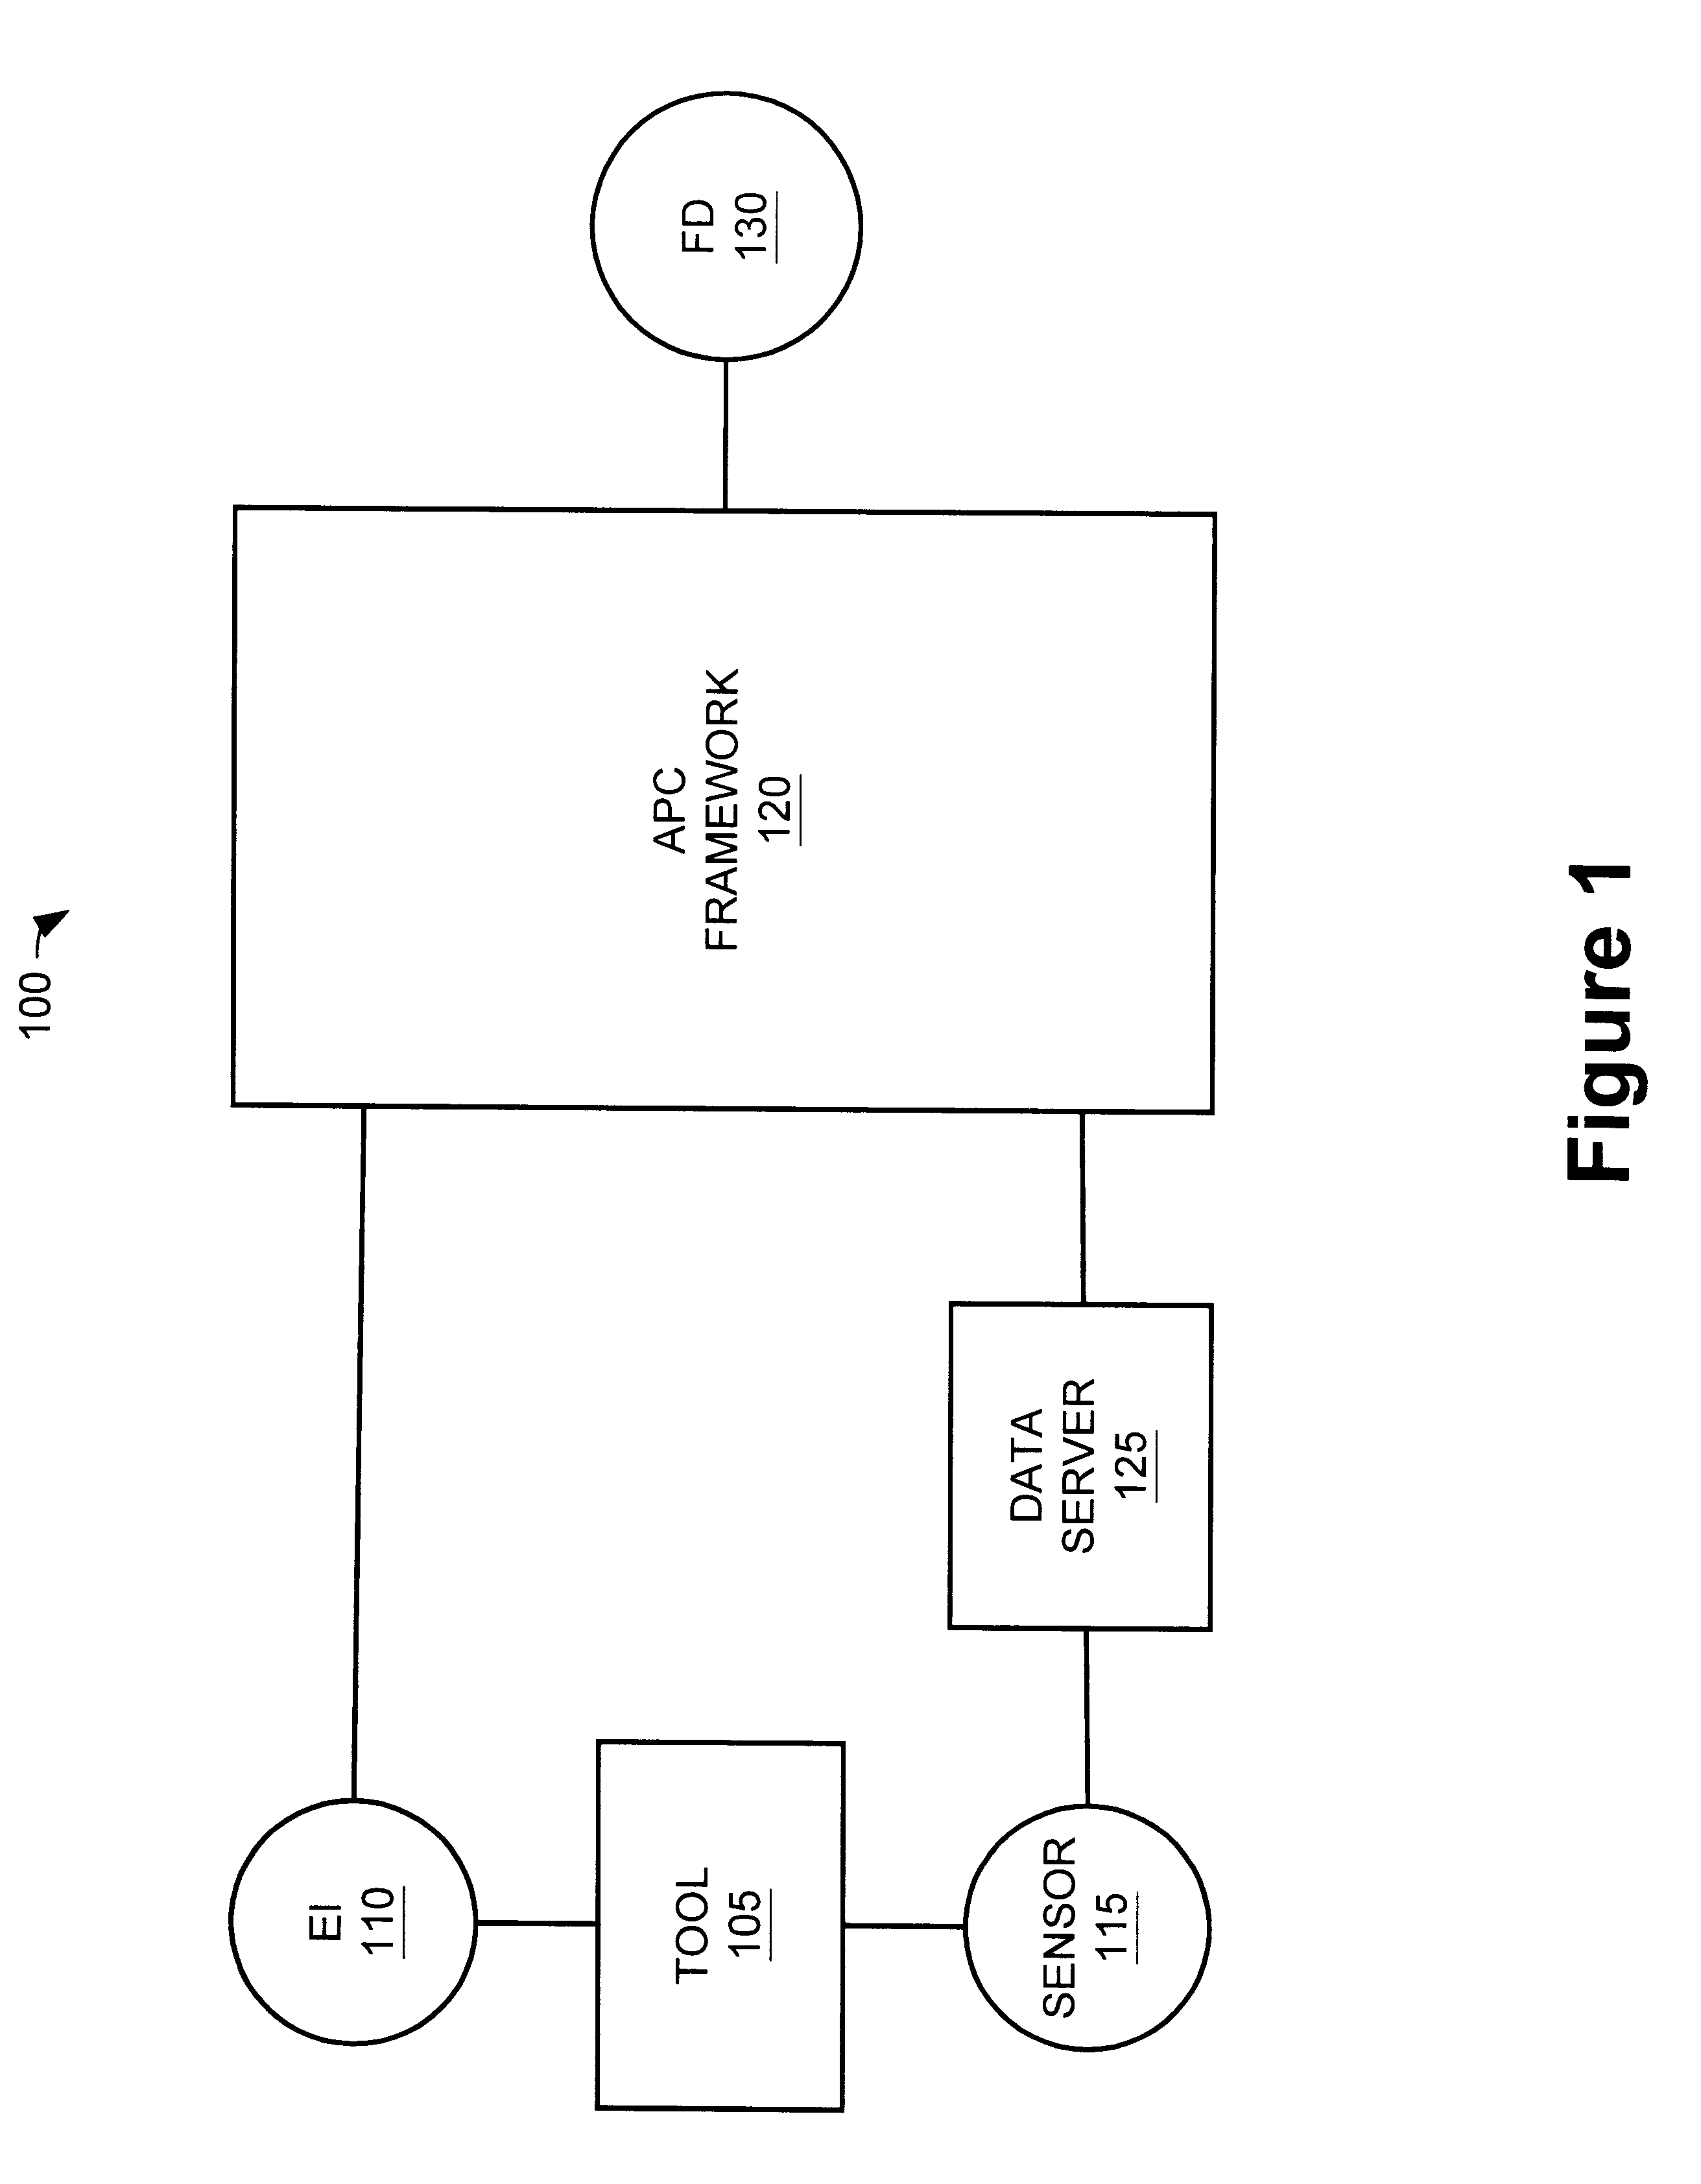 Method and apparatus for the integration of sensor data from a process tool in an advanced process control (APC) framework